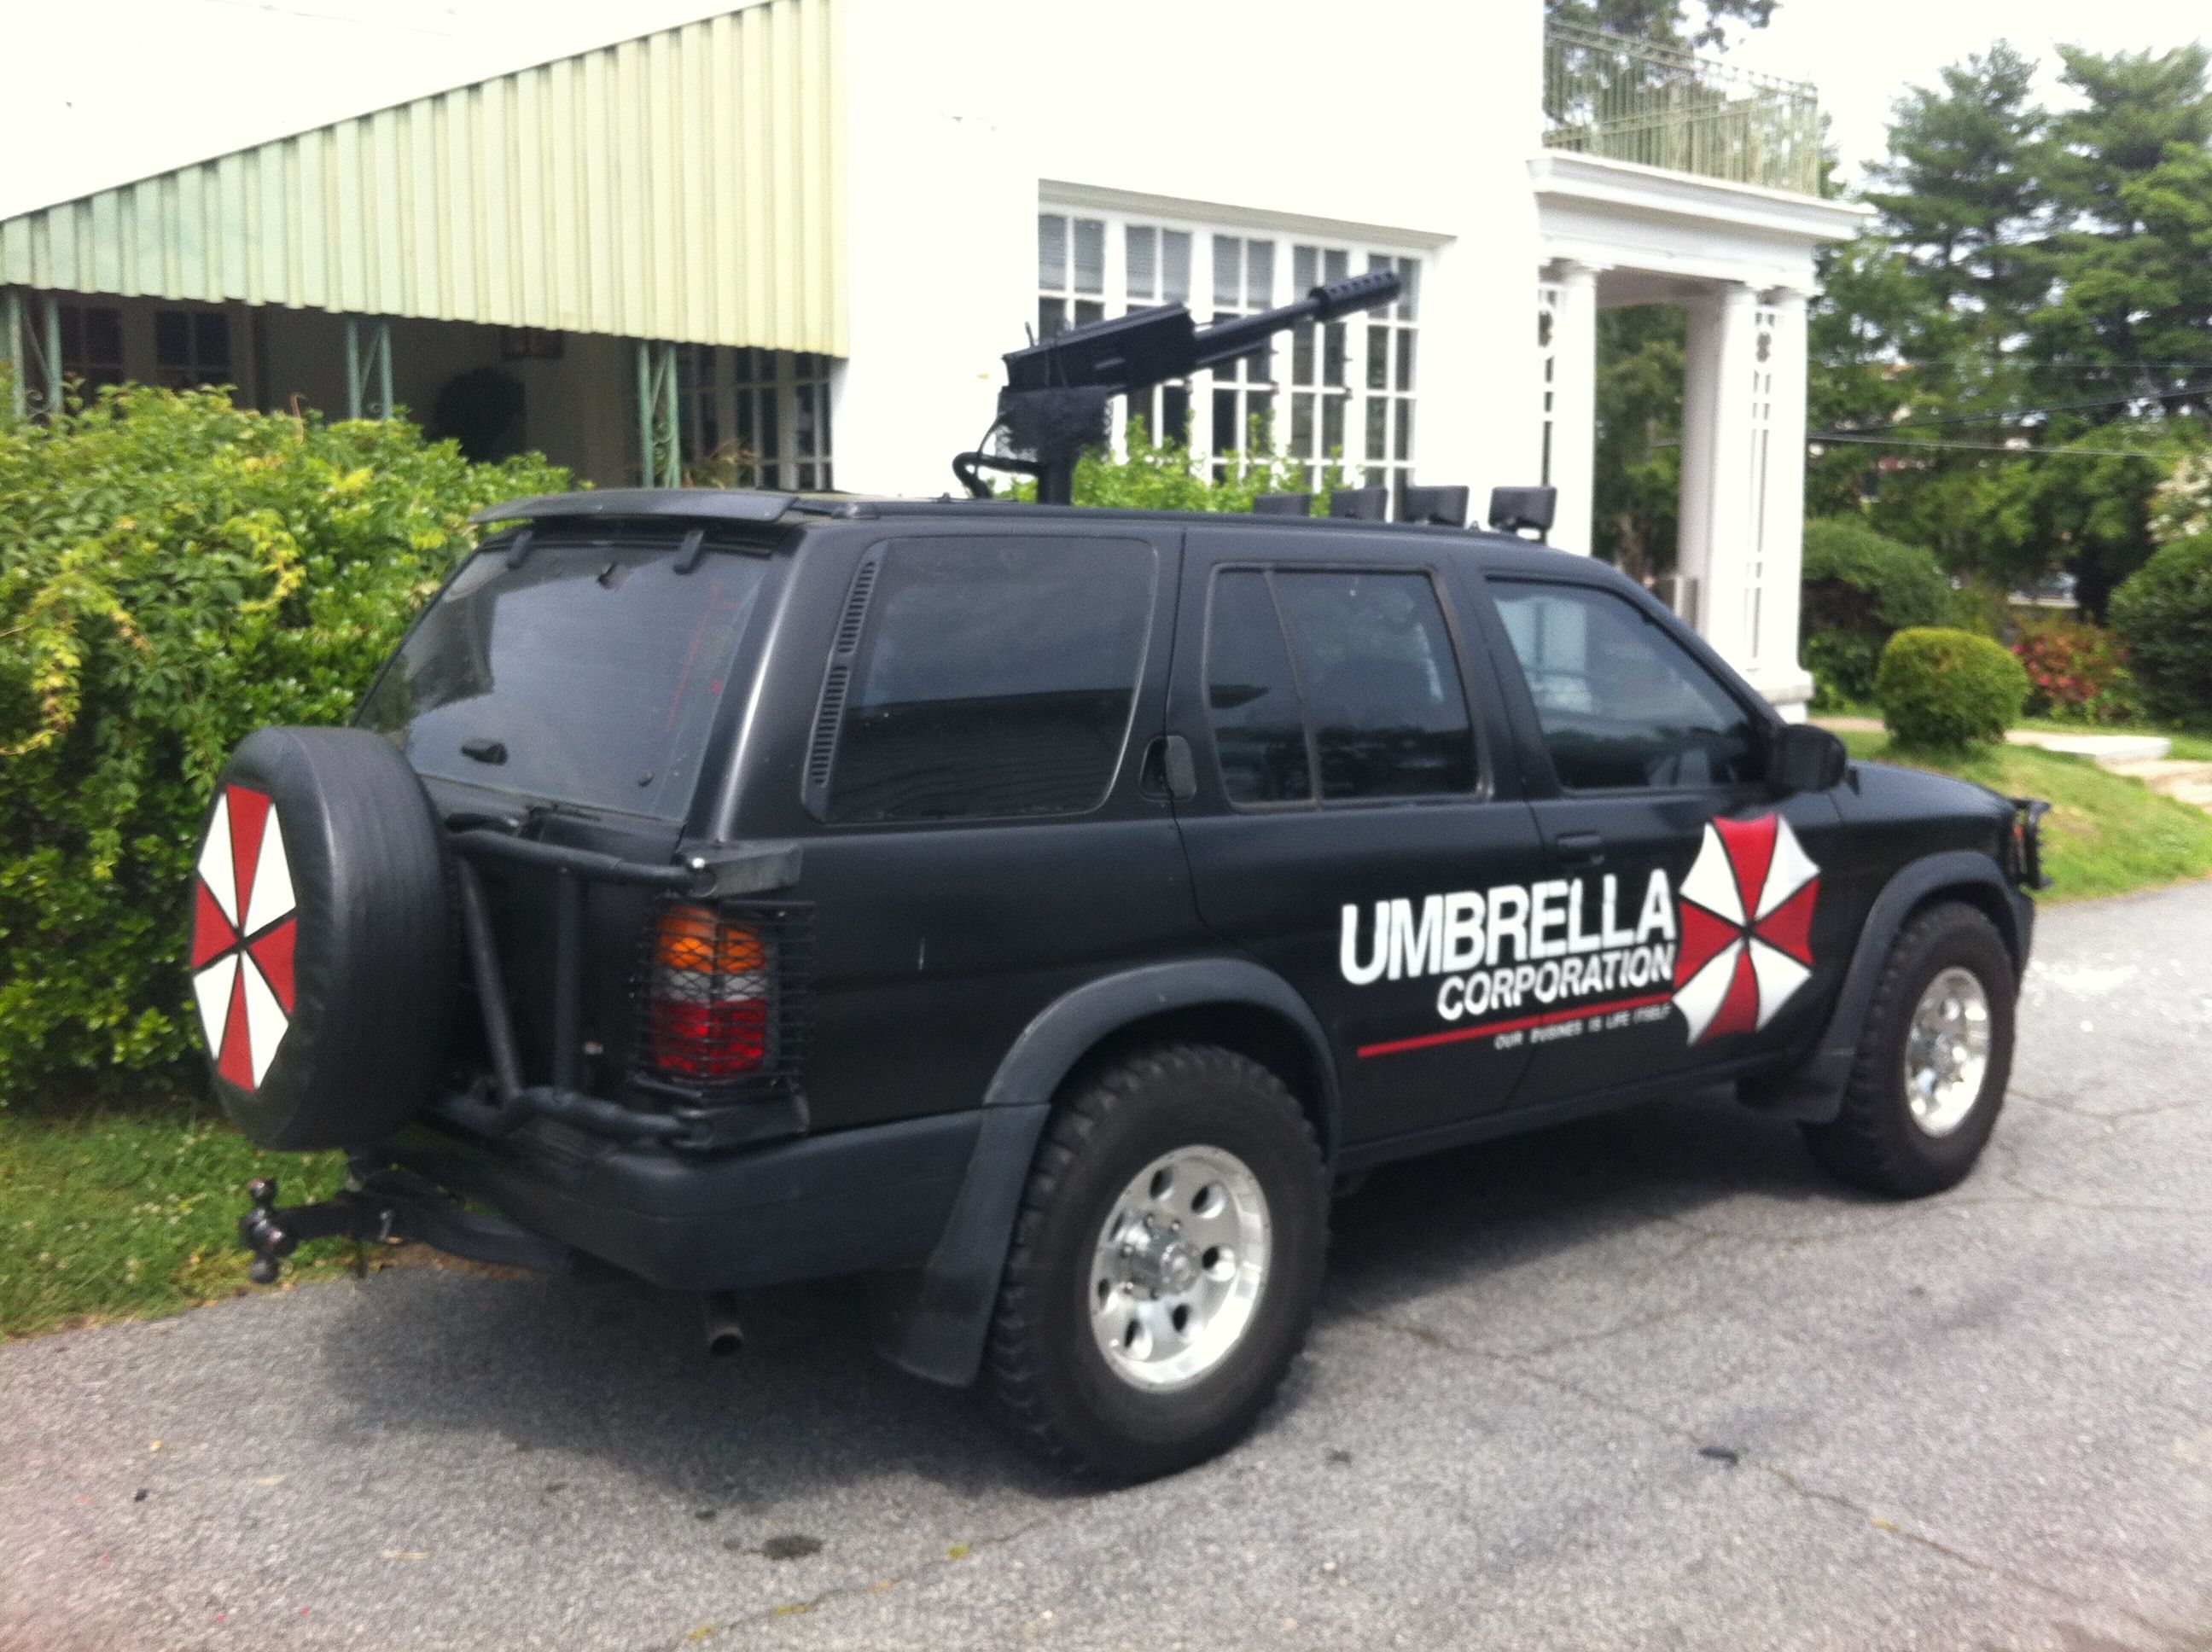 My Umbrella Corporation Themed Resident Evil SUV With Roof Mounted Flamethrower. Resident Evil Cosplay, Resident Evil, Umbrella Corporation